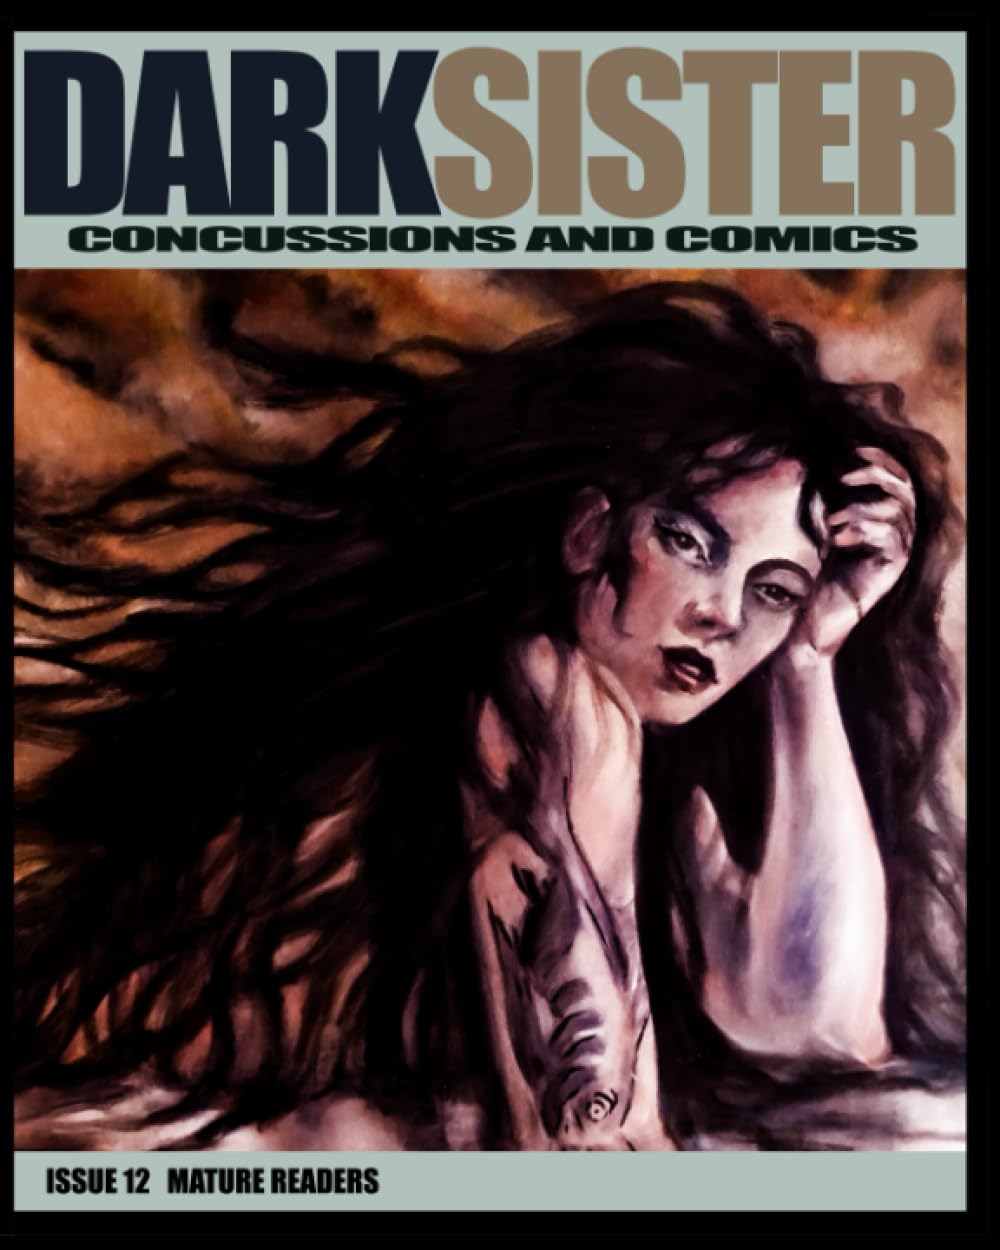 Dark Sister 12 is now available